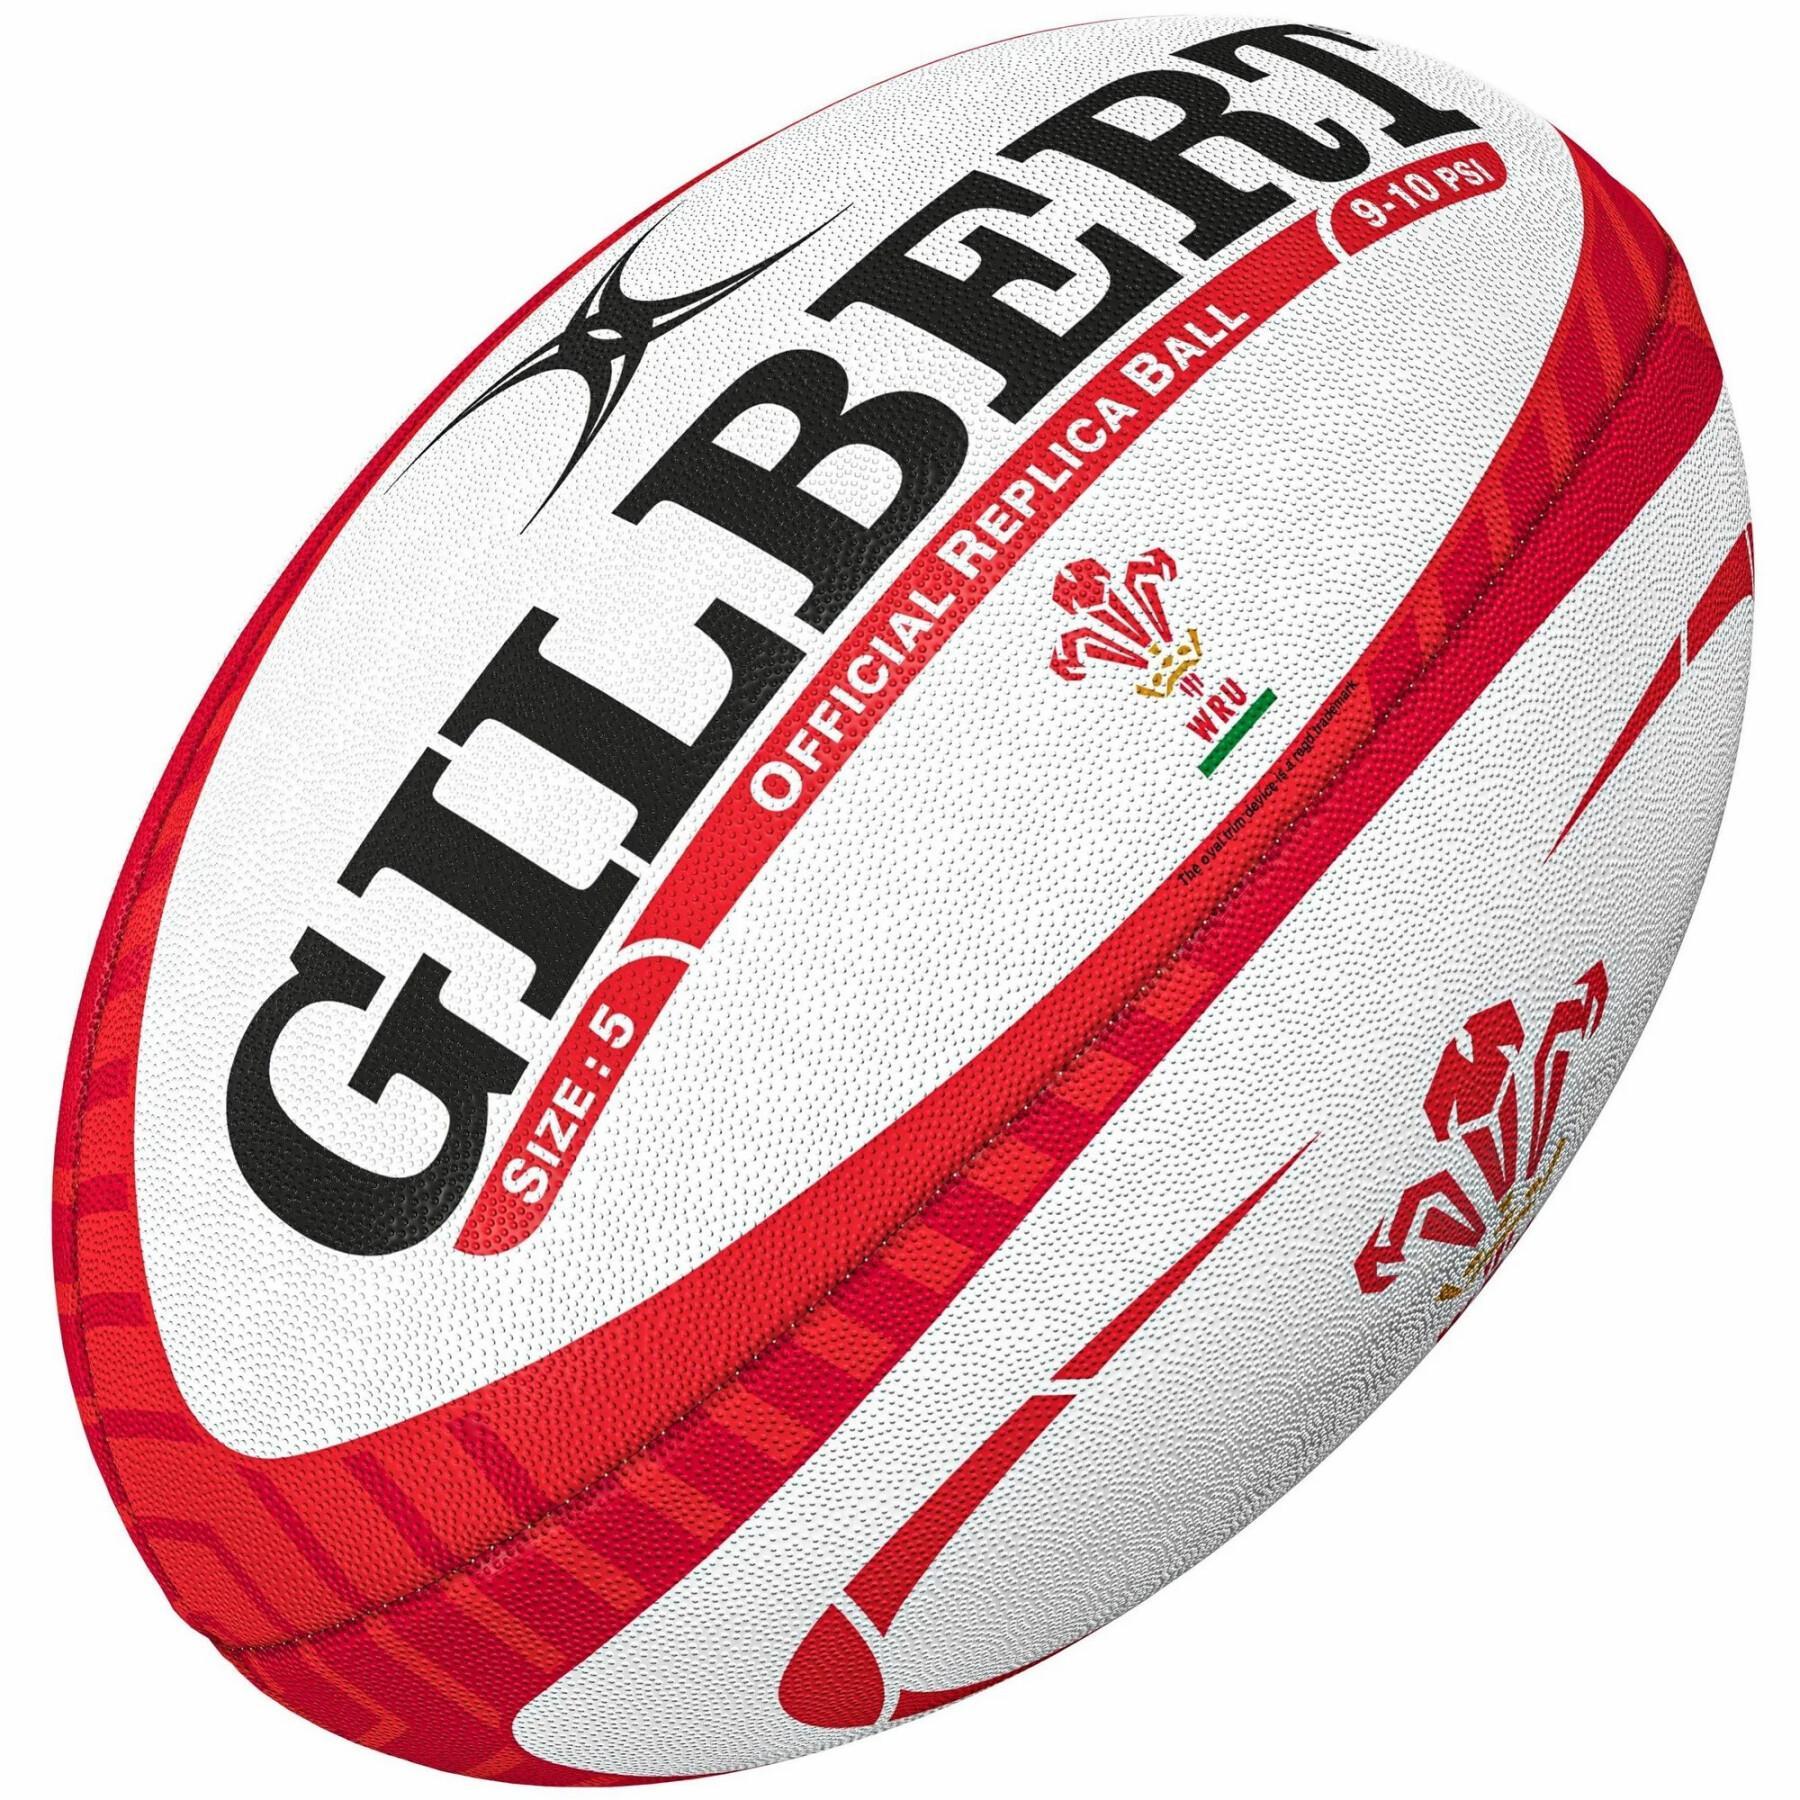 Pack of 25 Balls Wales